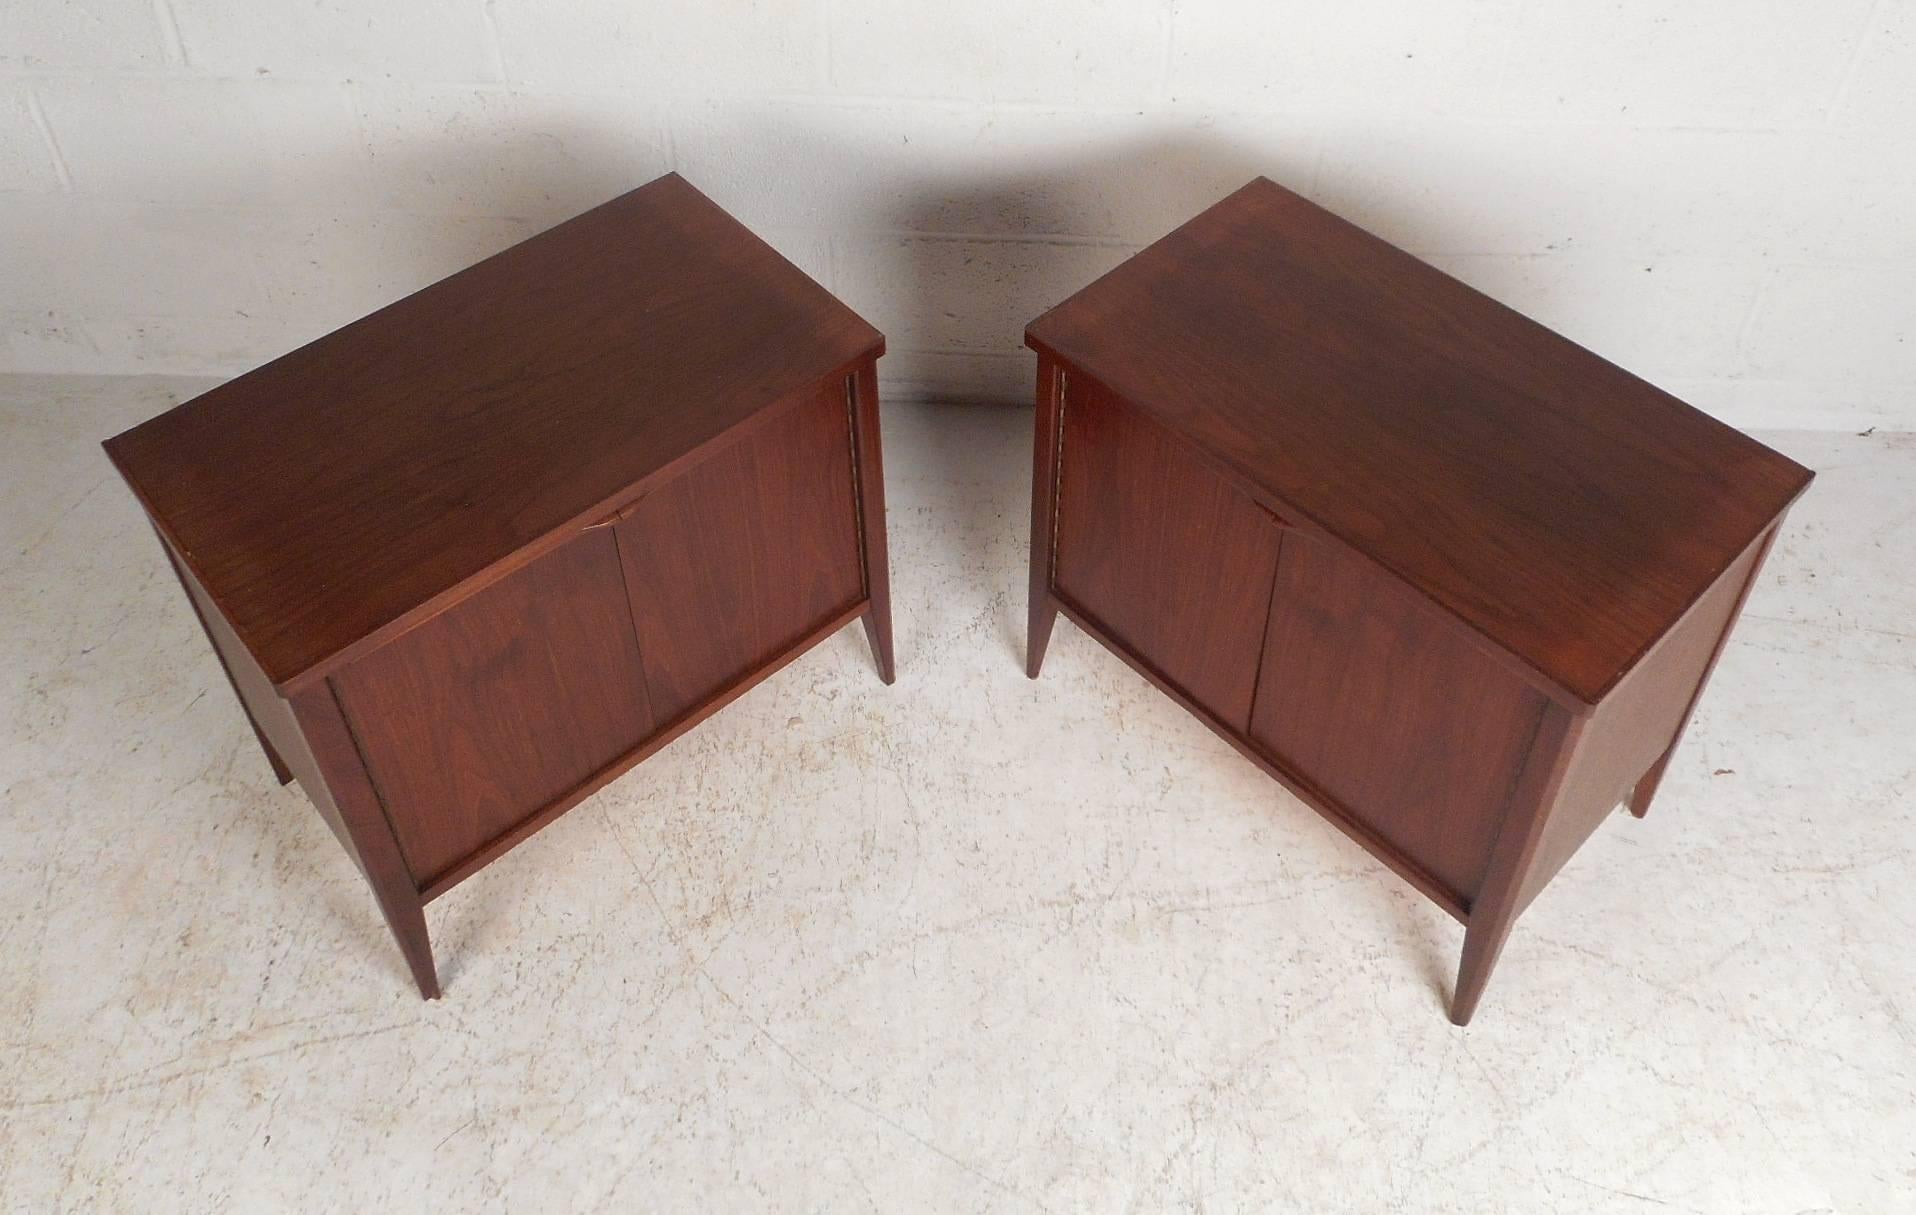 Pair of Mid-Century Modern Walnut Nightstands In Good Condition For Sale In Brooklyn, NY